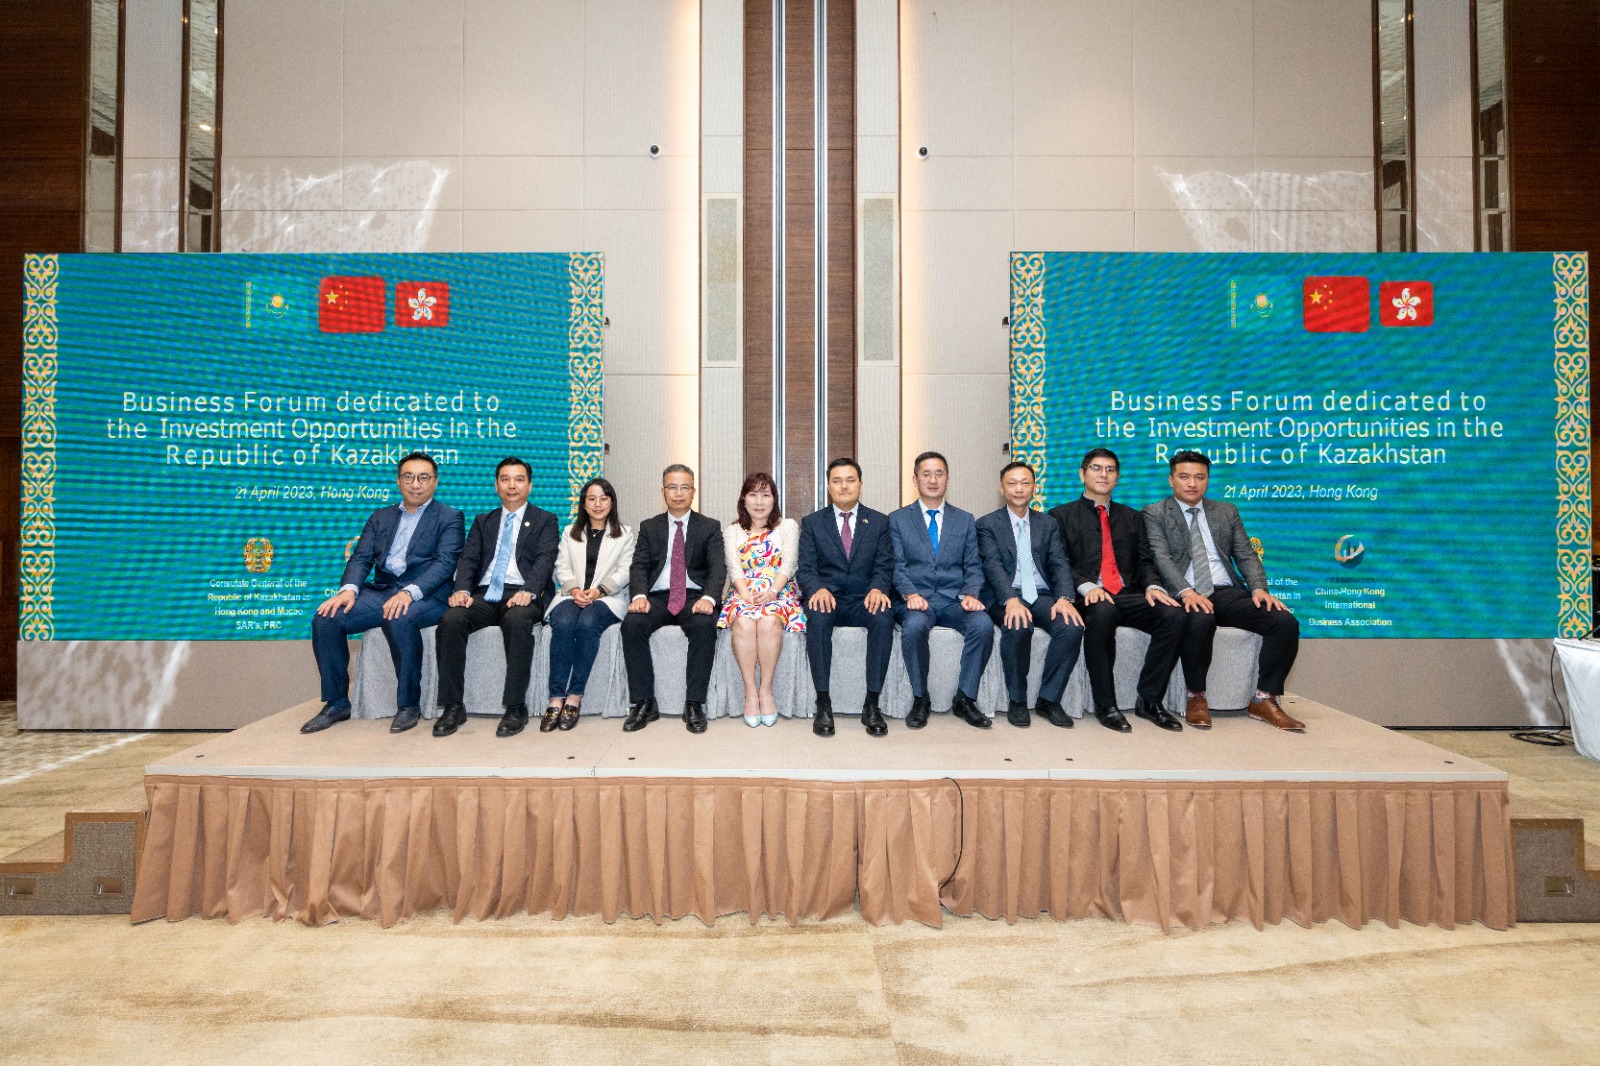 The Business Forum dedicated to the investment opportunities of the Republic of Kazakhstan was held in Hong Kong